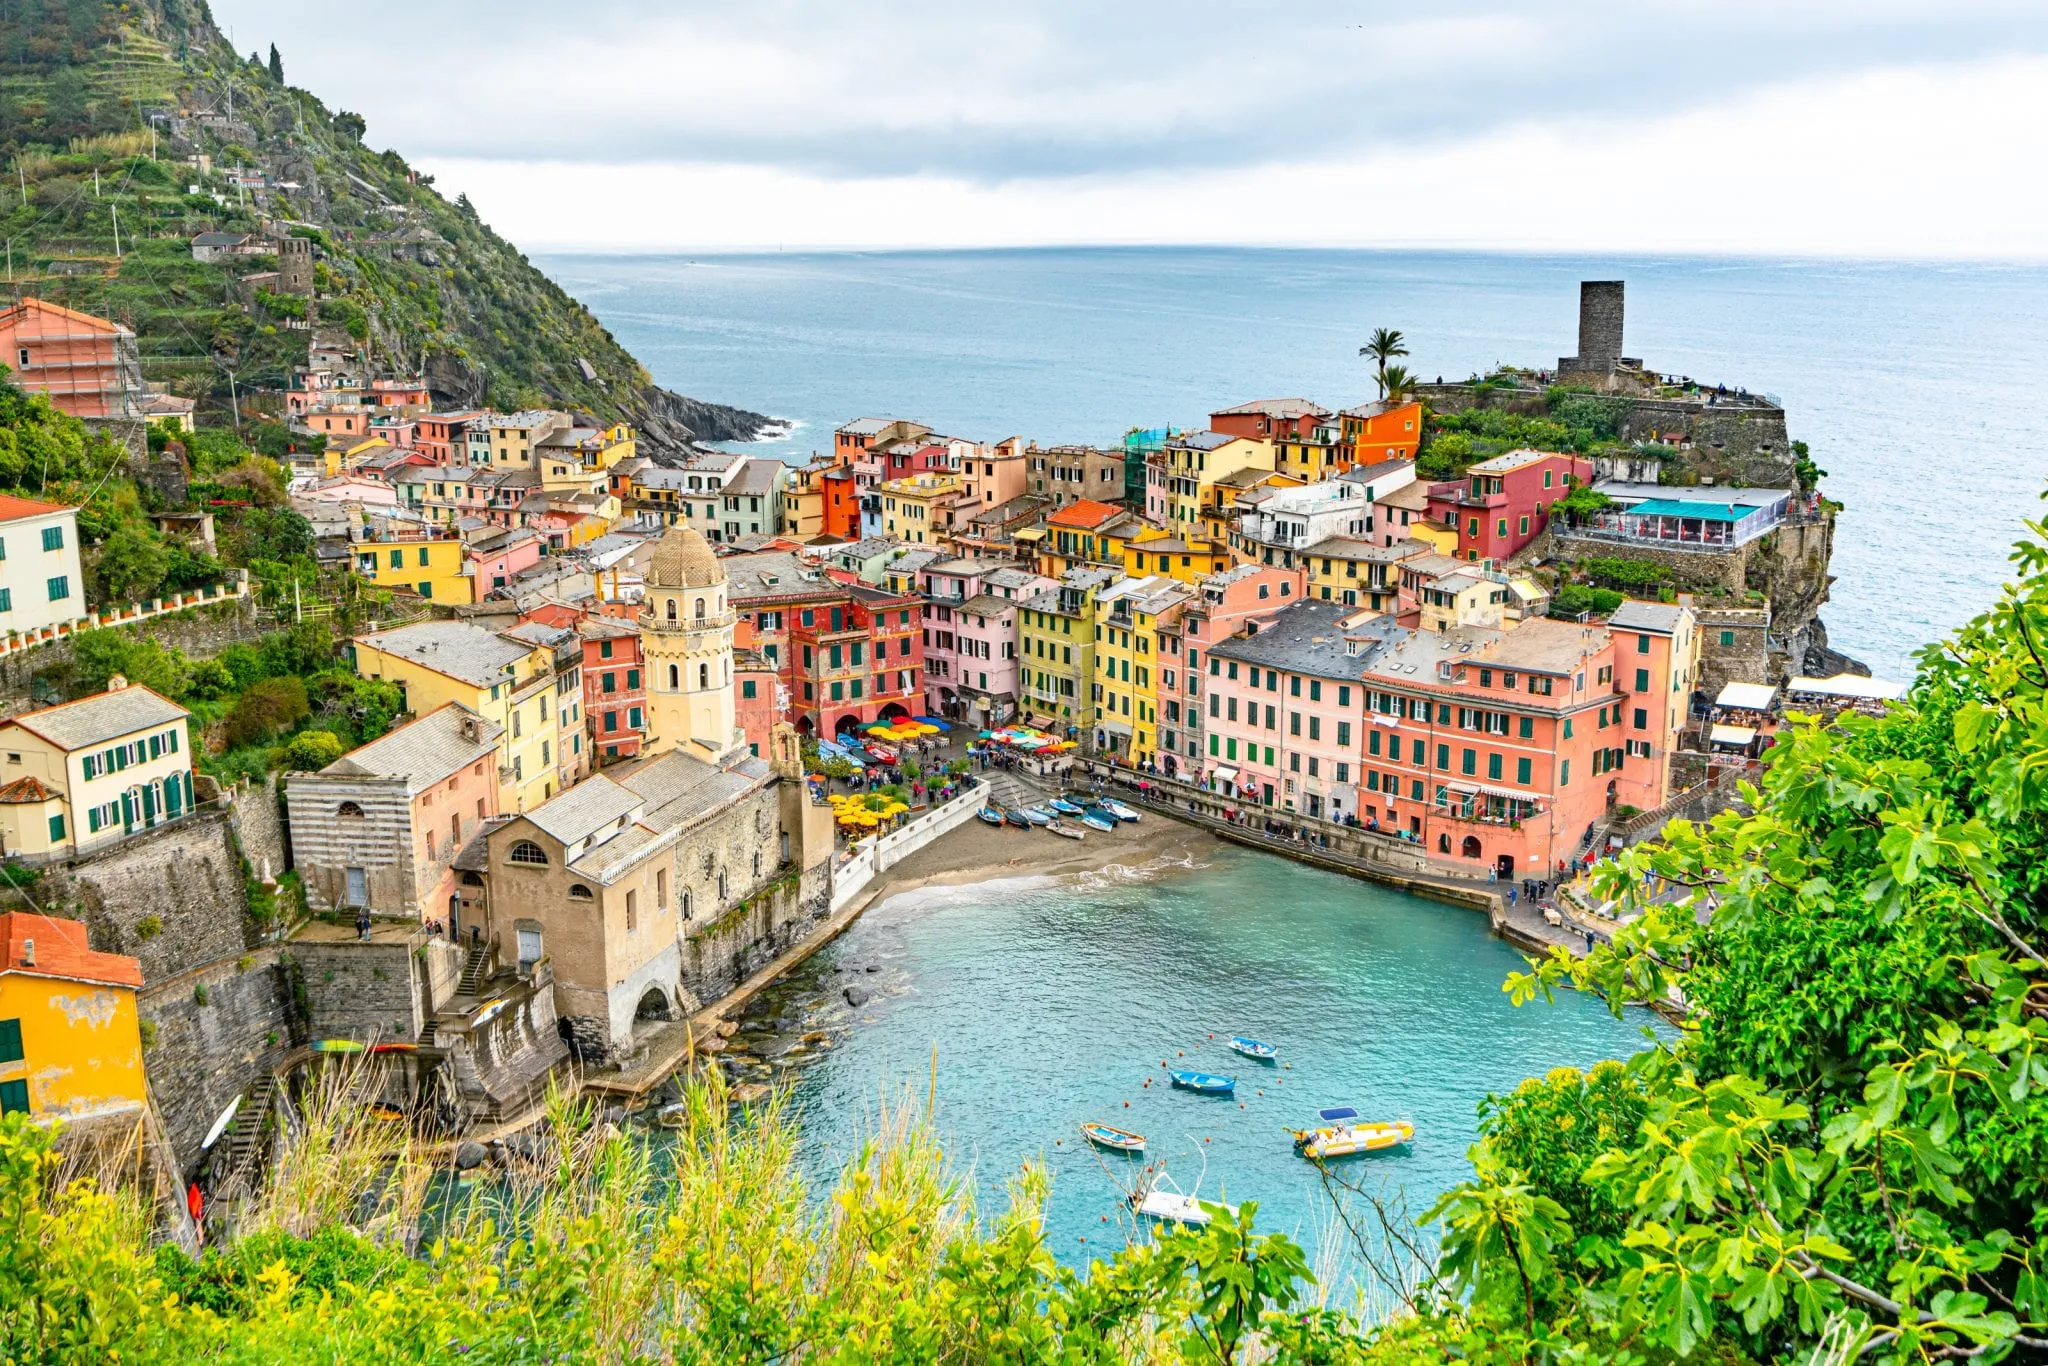 The Perfect One Day in Cinque Terre Itinerary (+ Travel Tips!) - Our